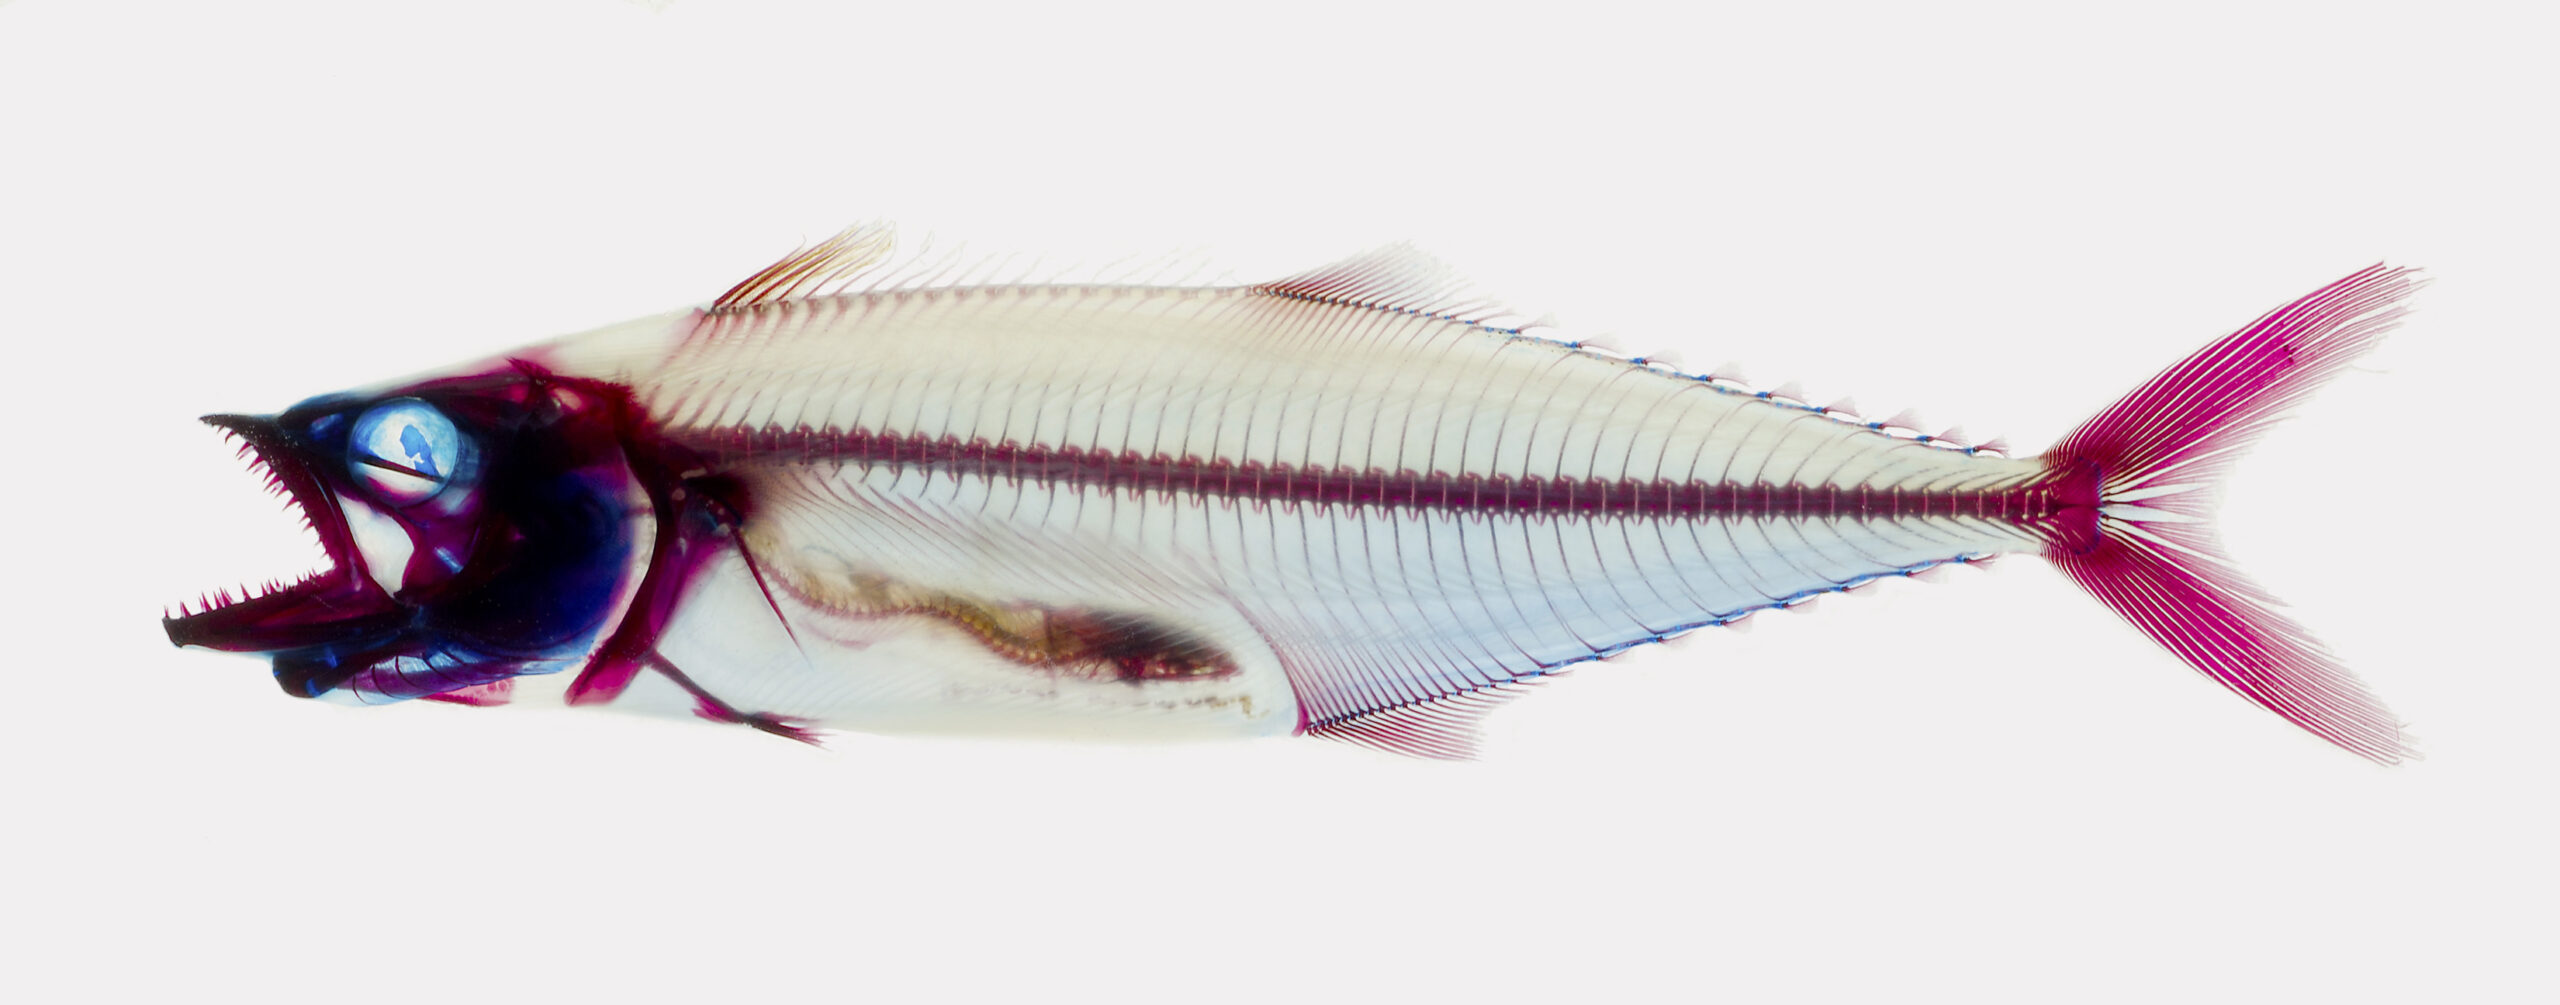 An Atlantic spotted mackerel with its skeleton stained for analysis at the American Museum of Natural History.